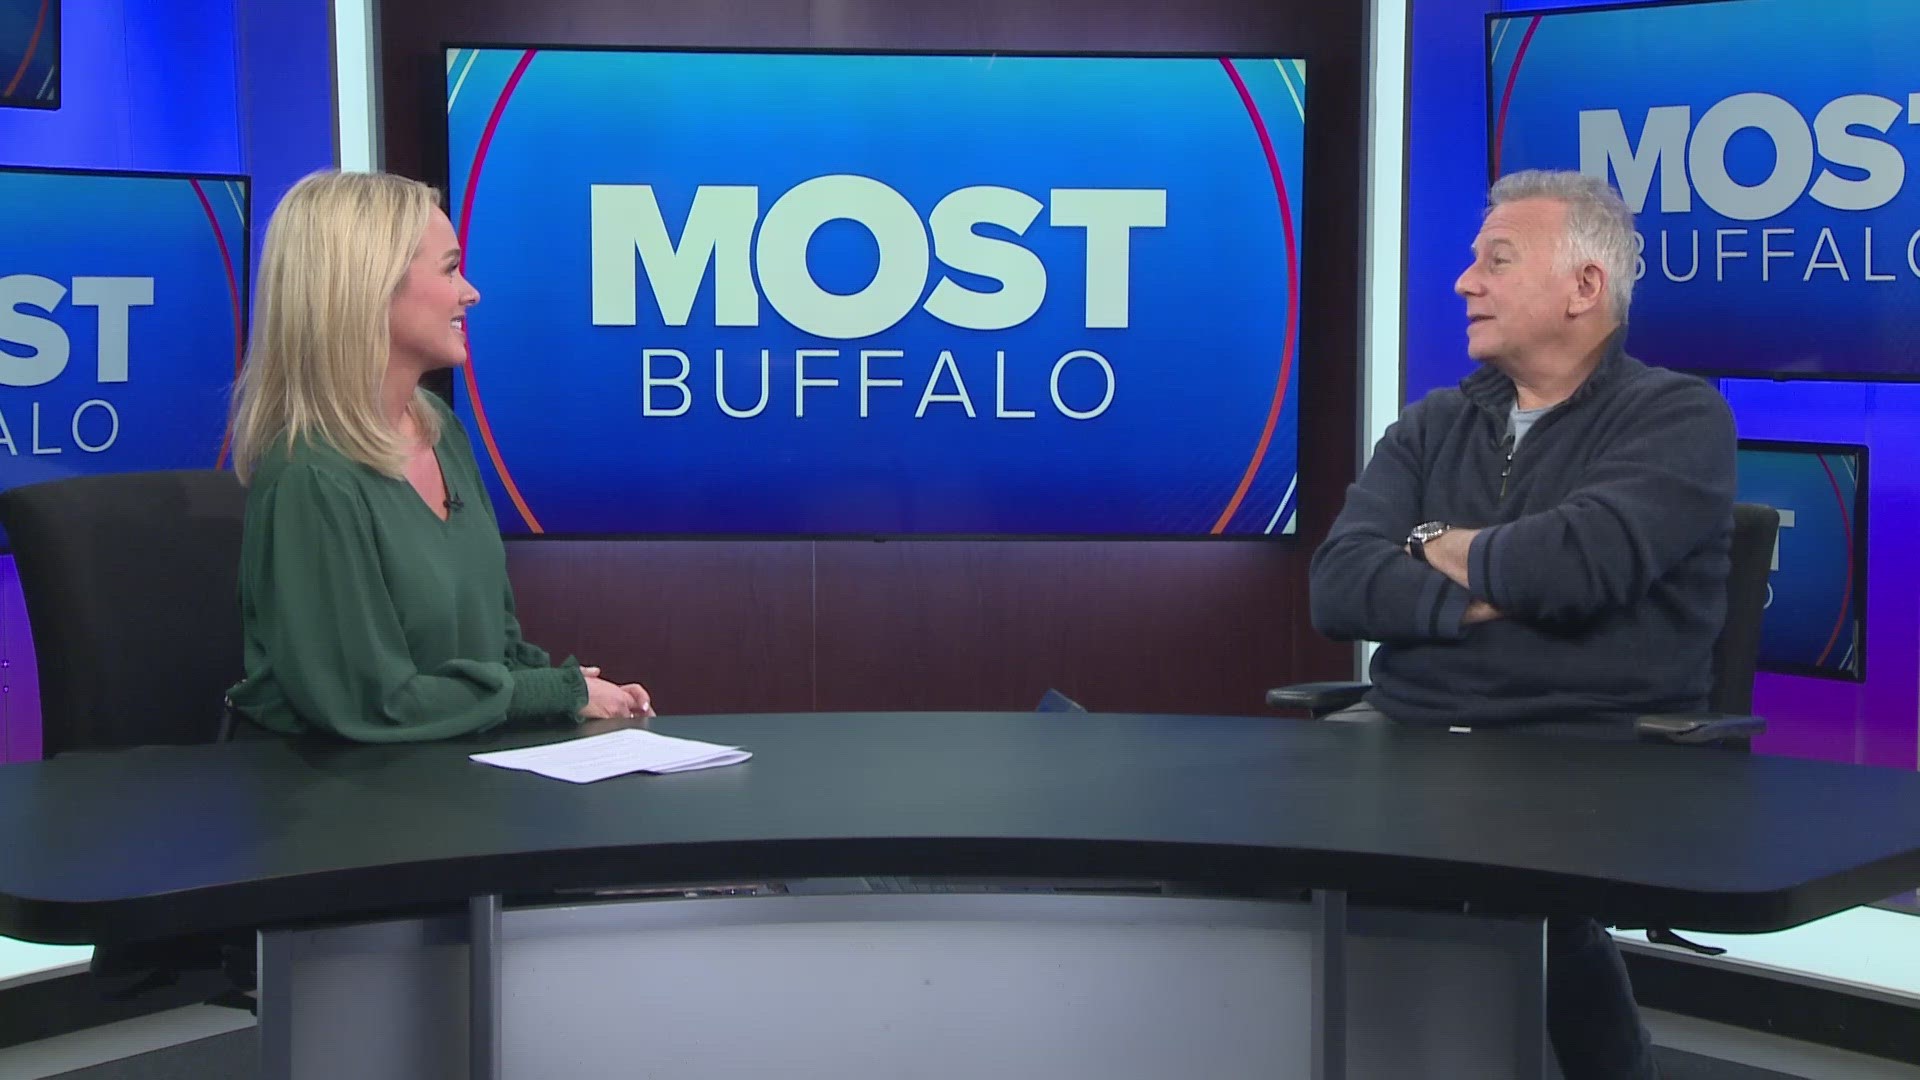 Paul Reiser visits with Kate on Most Buffalo